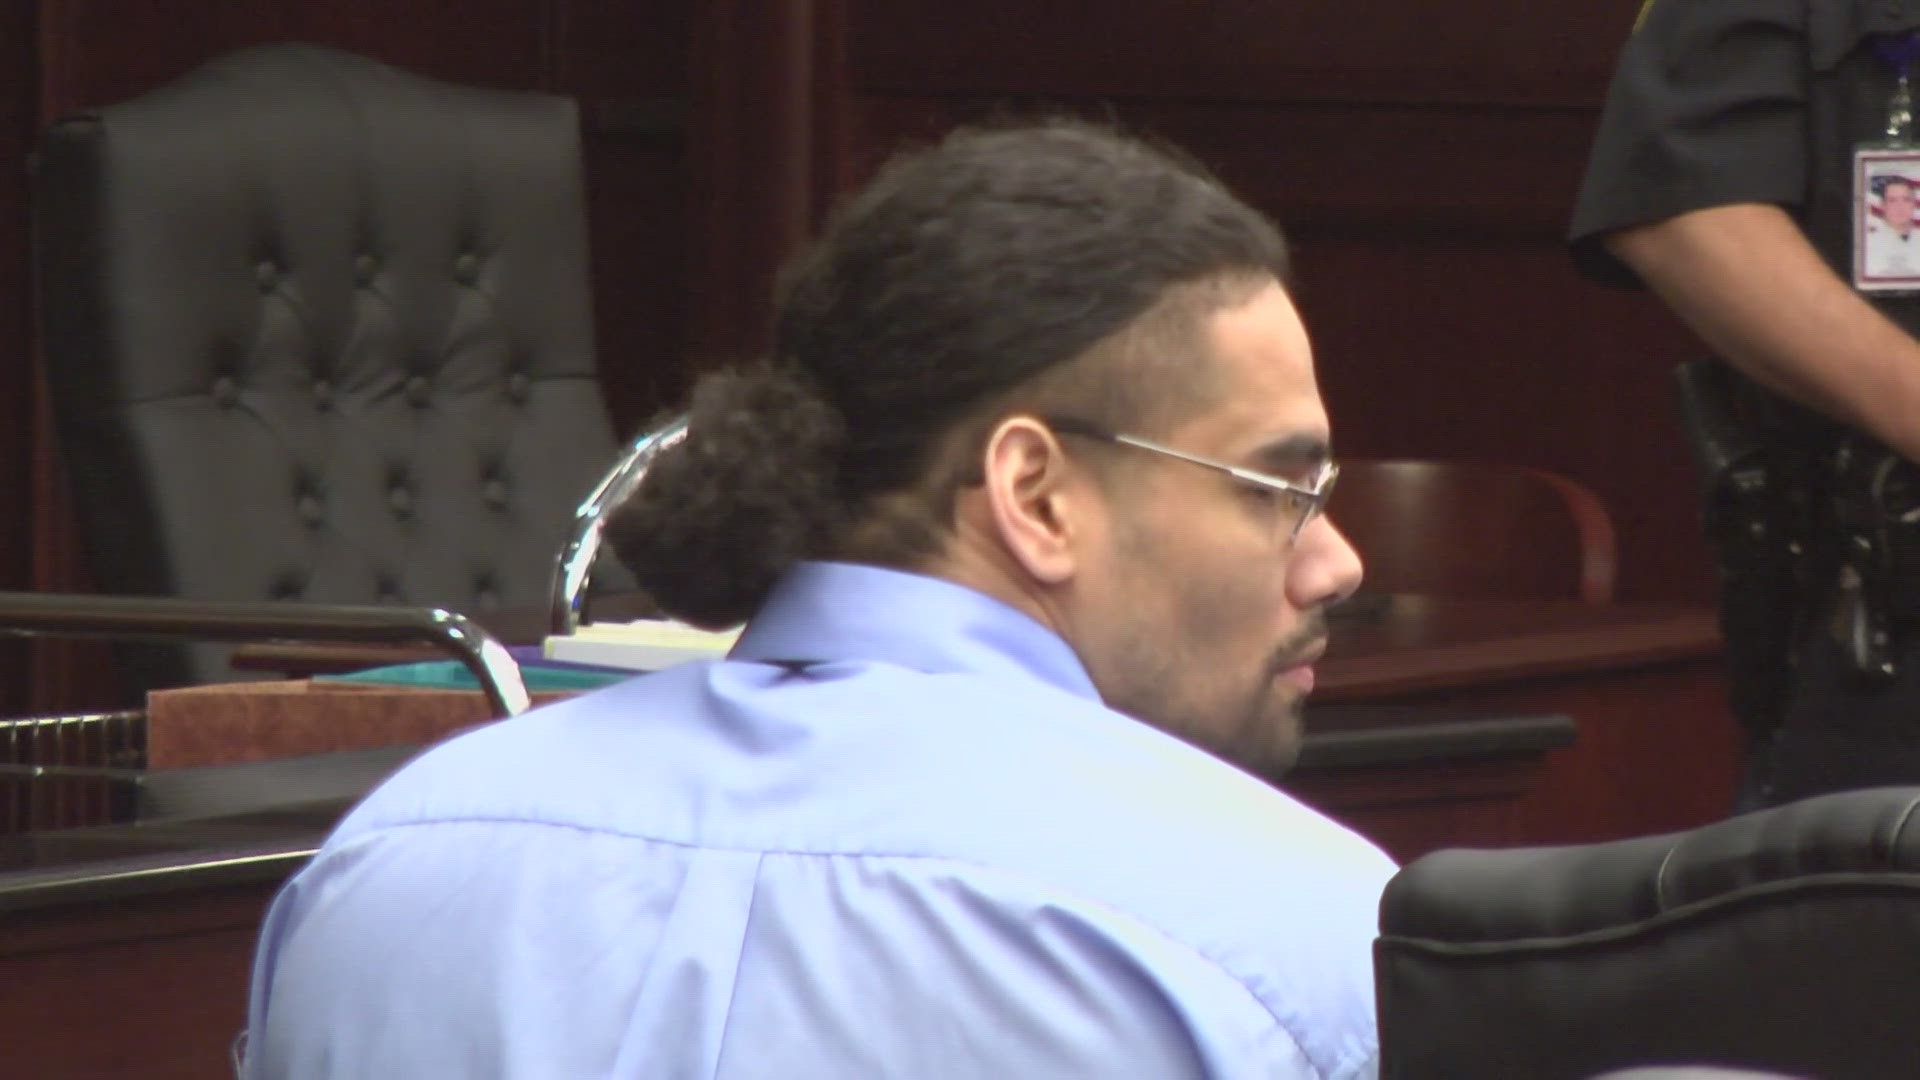 Convicted murderer and rapist Johnathan Quiles will spend the rest of his life in prison after a jury spared him from the death penalty